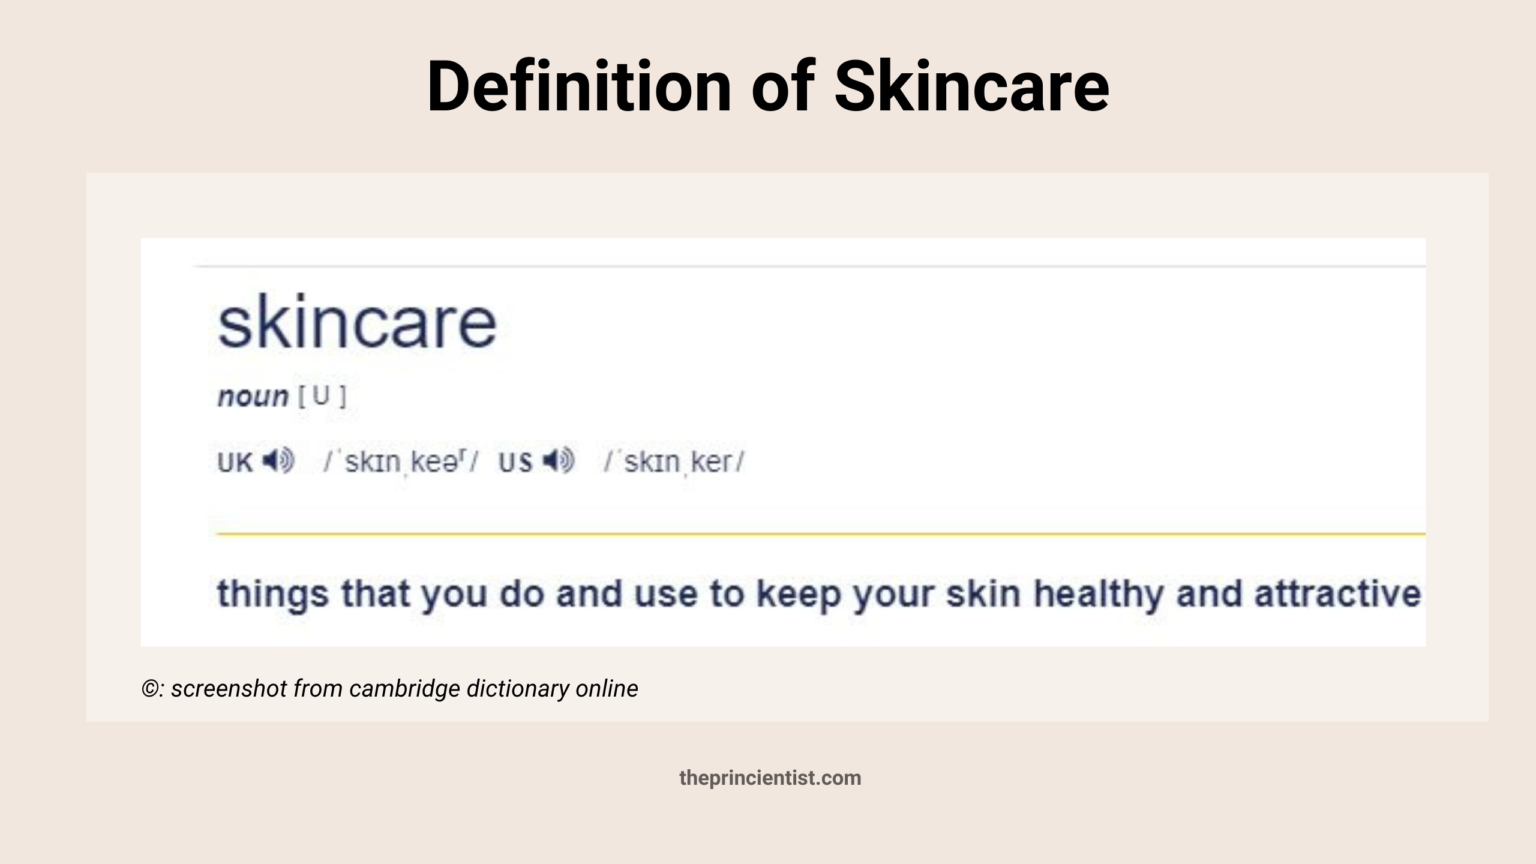 writen definiton of what is skincare